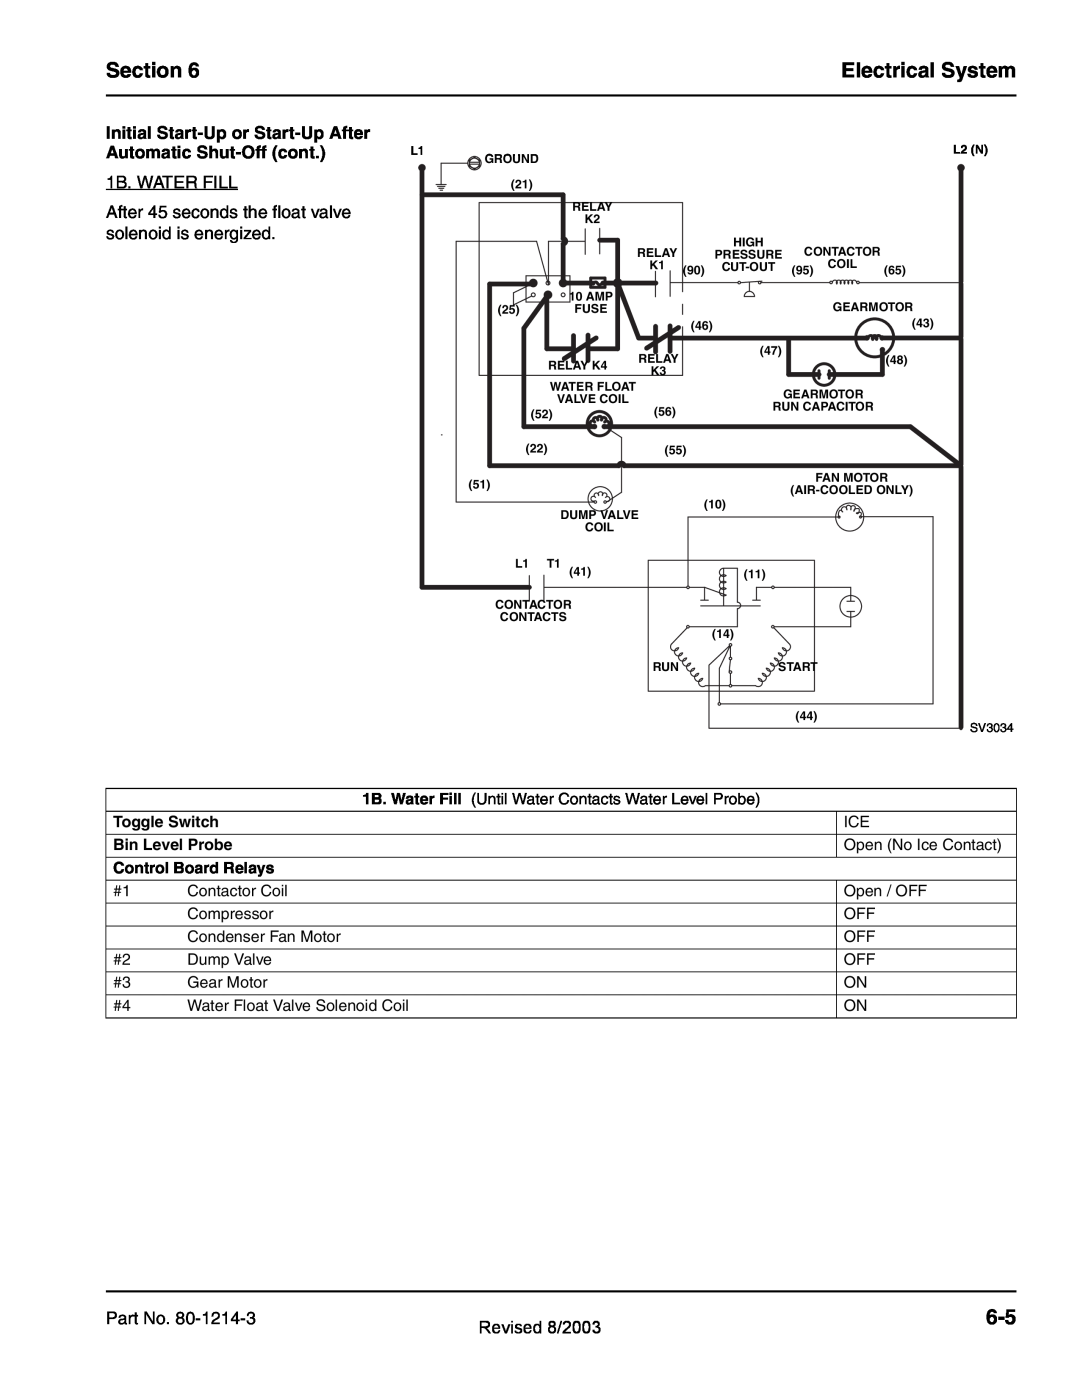 Manitowoc Ice QC0700, QF2300, QF0800, QF0400, QF2200 service manual Section, Electrical System, 1B. WATER FILL, Part No 